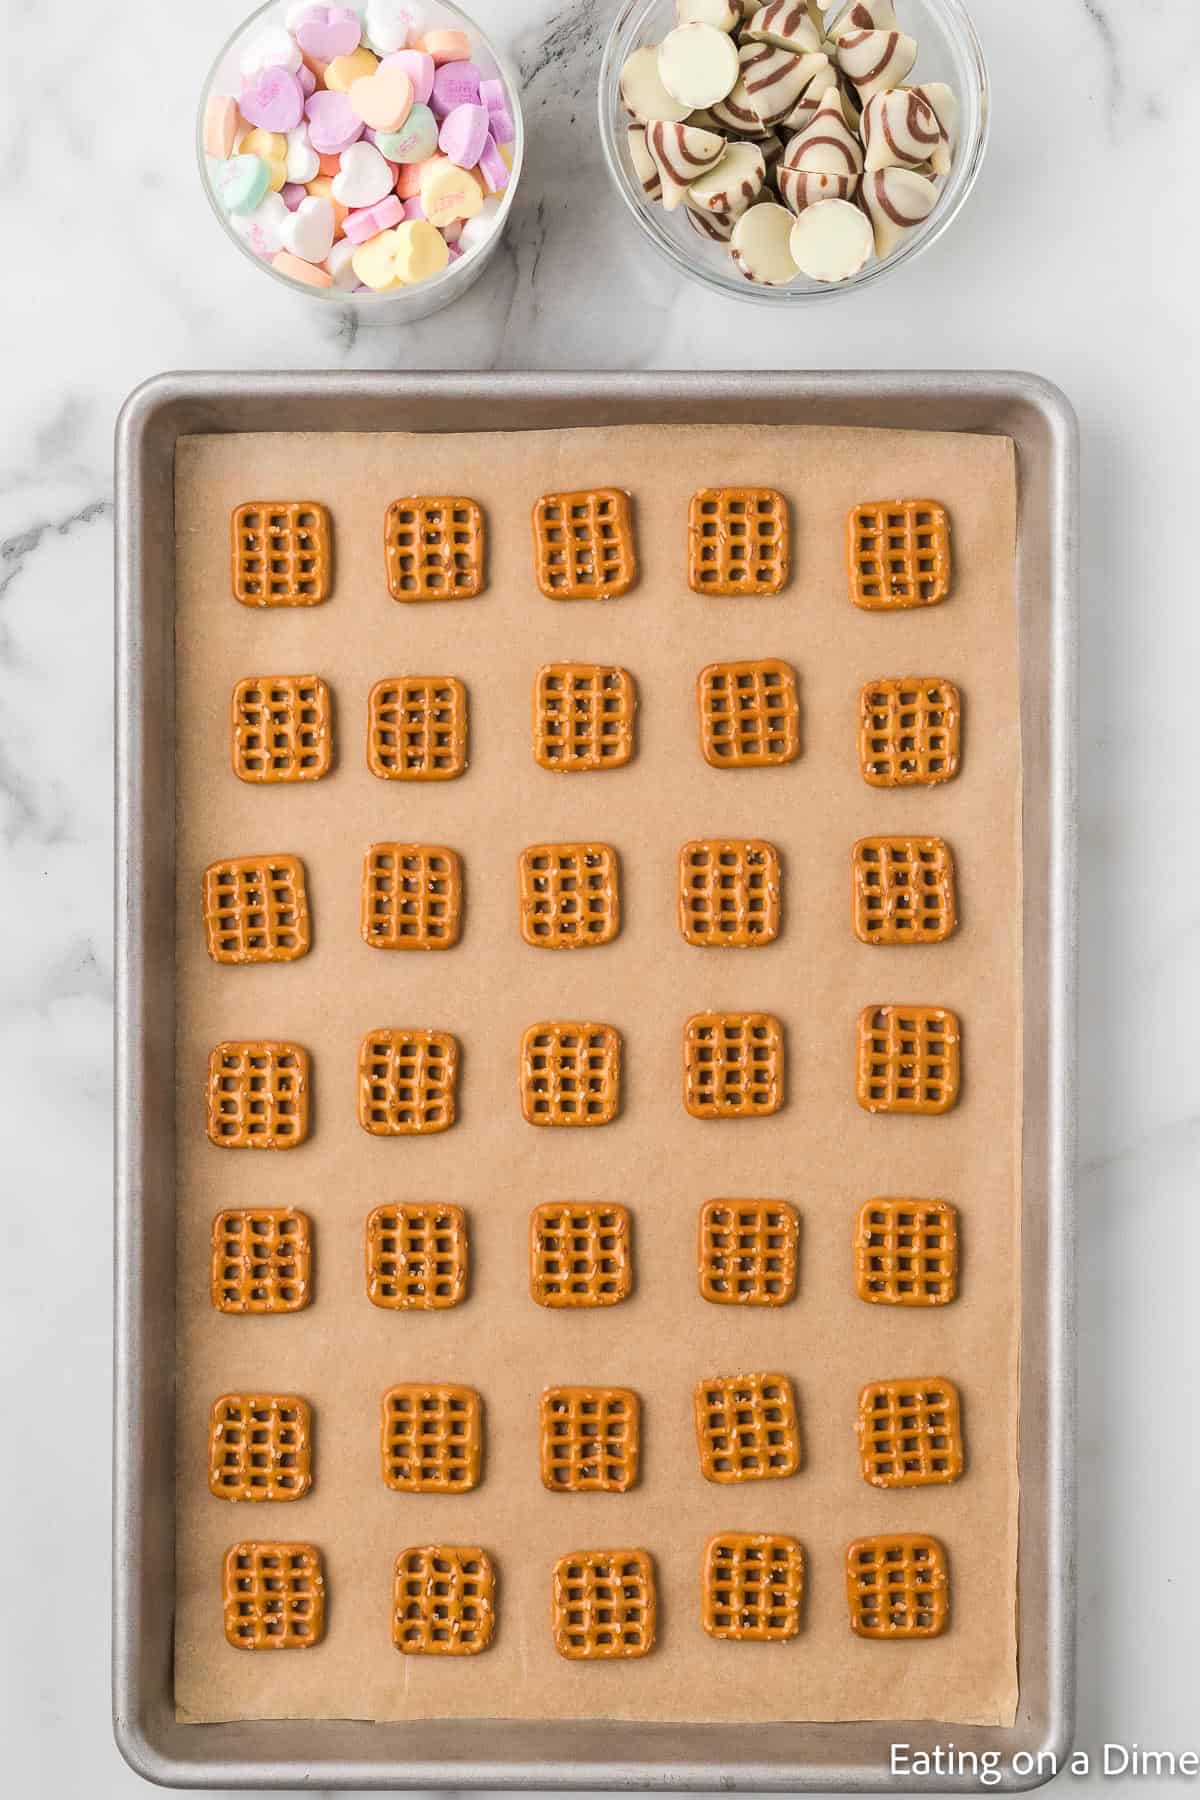 Placing the pretzels on a baking sheet